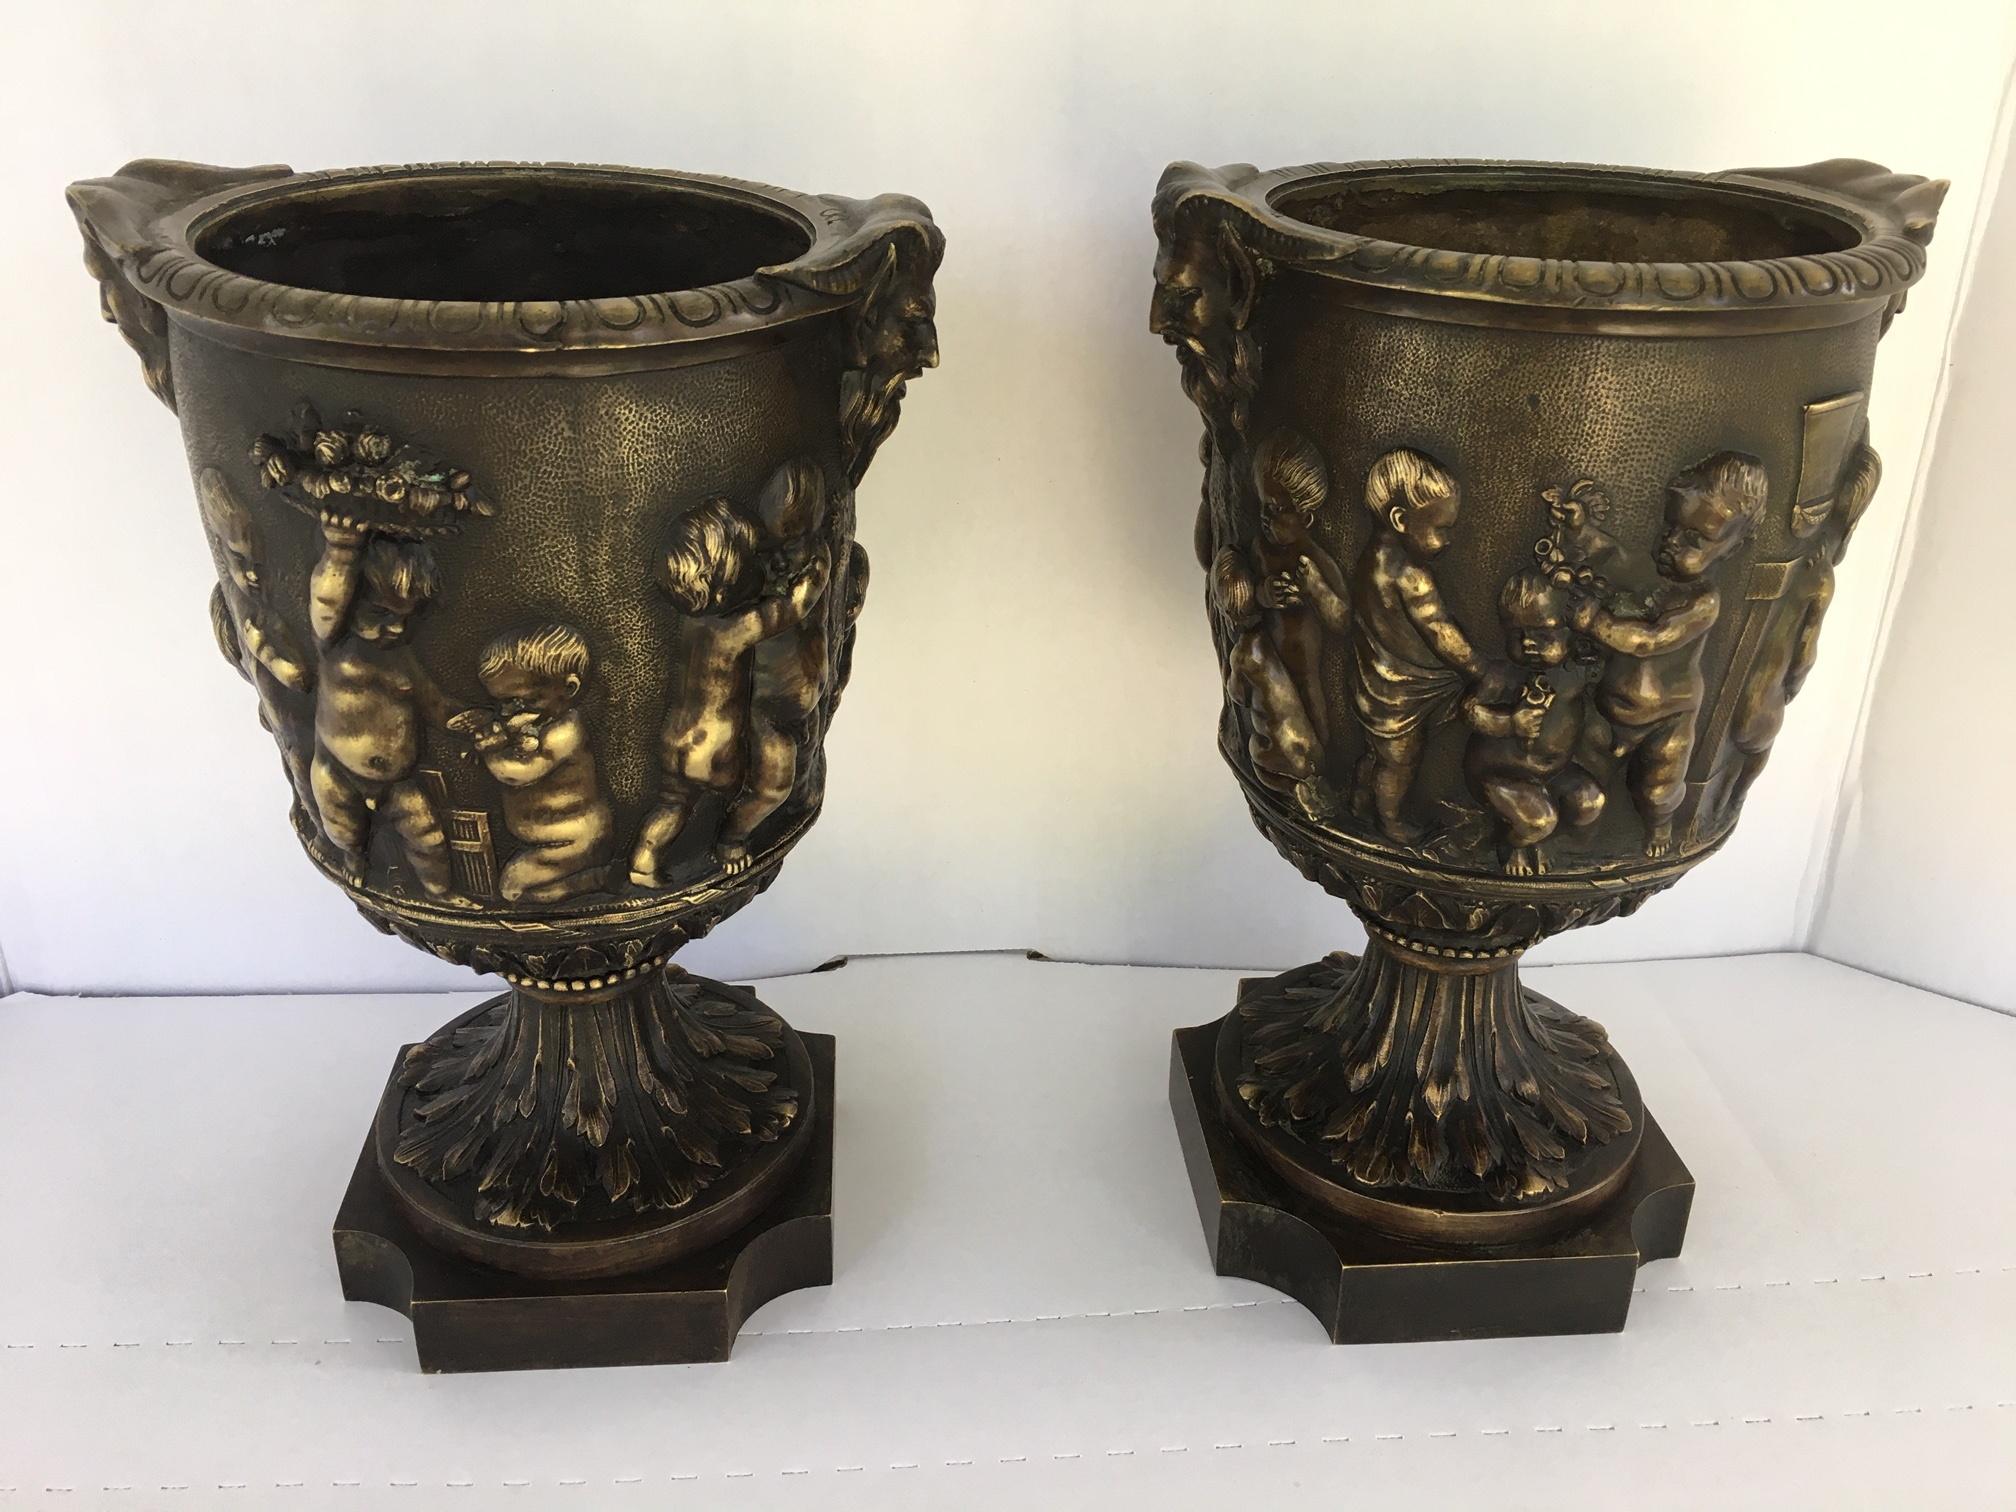 Pair of 19th century French bronze urns after Clodion

Superb pair of French classical bronze open urns. These heavy urns are patinated and casted in exceptional quality. The body is adorned with frolicking putti with stylized satyr handles. The